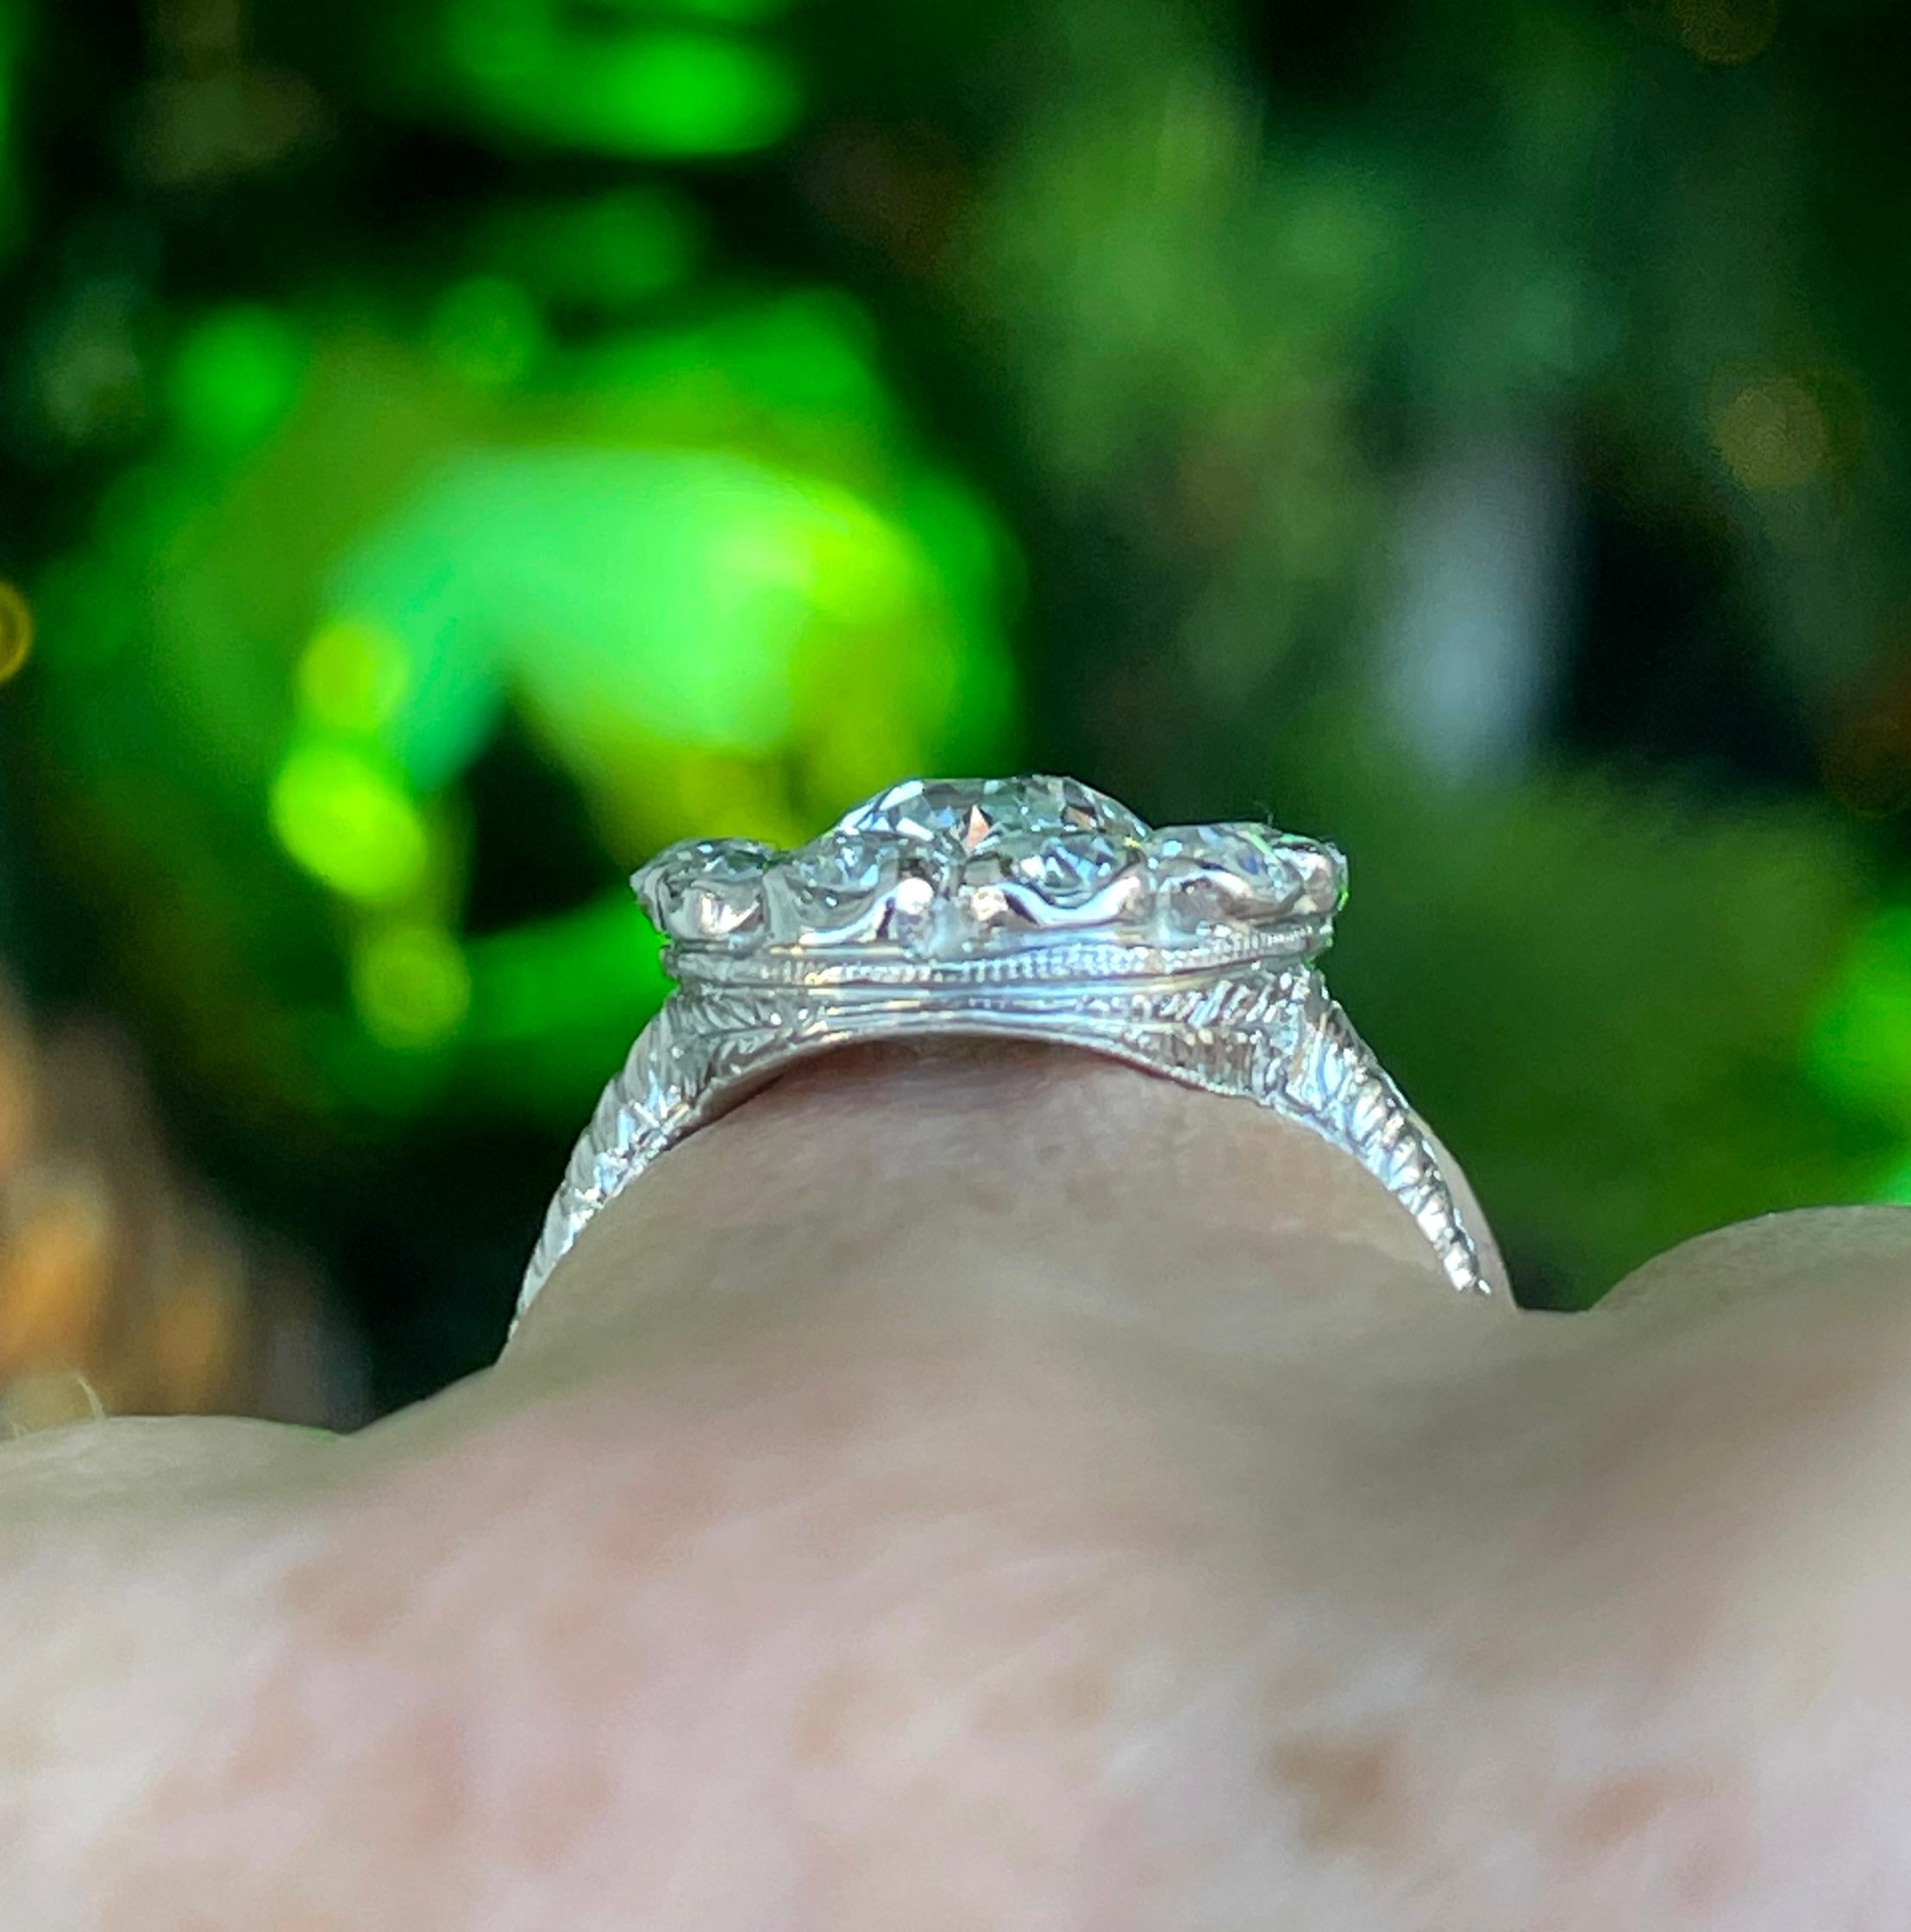 Antique Edwardian 1900s GIA H-VS2 3.38ctw OLD Euro Cut Diamond Cluster Plat Ring For Sale 5